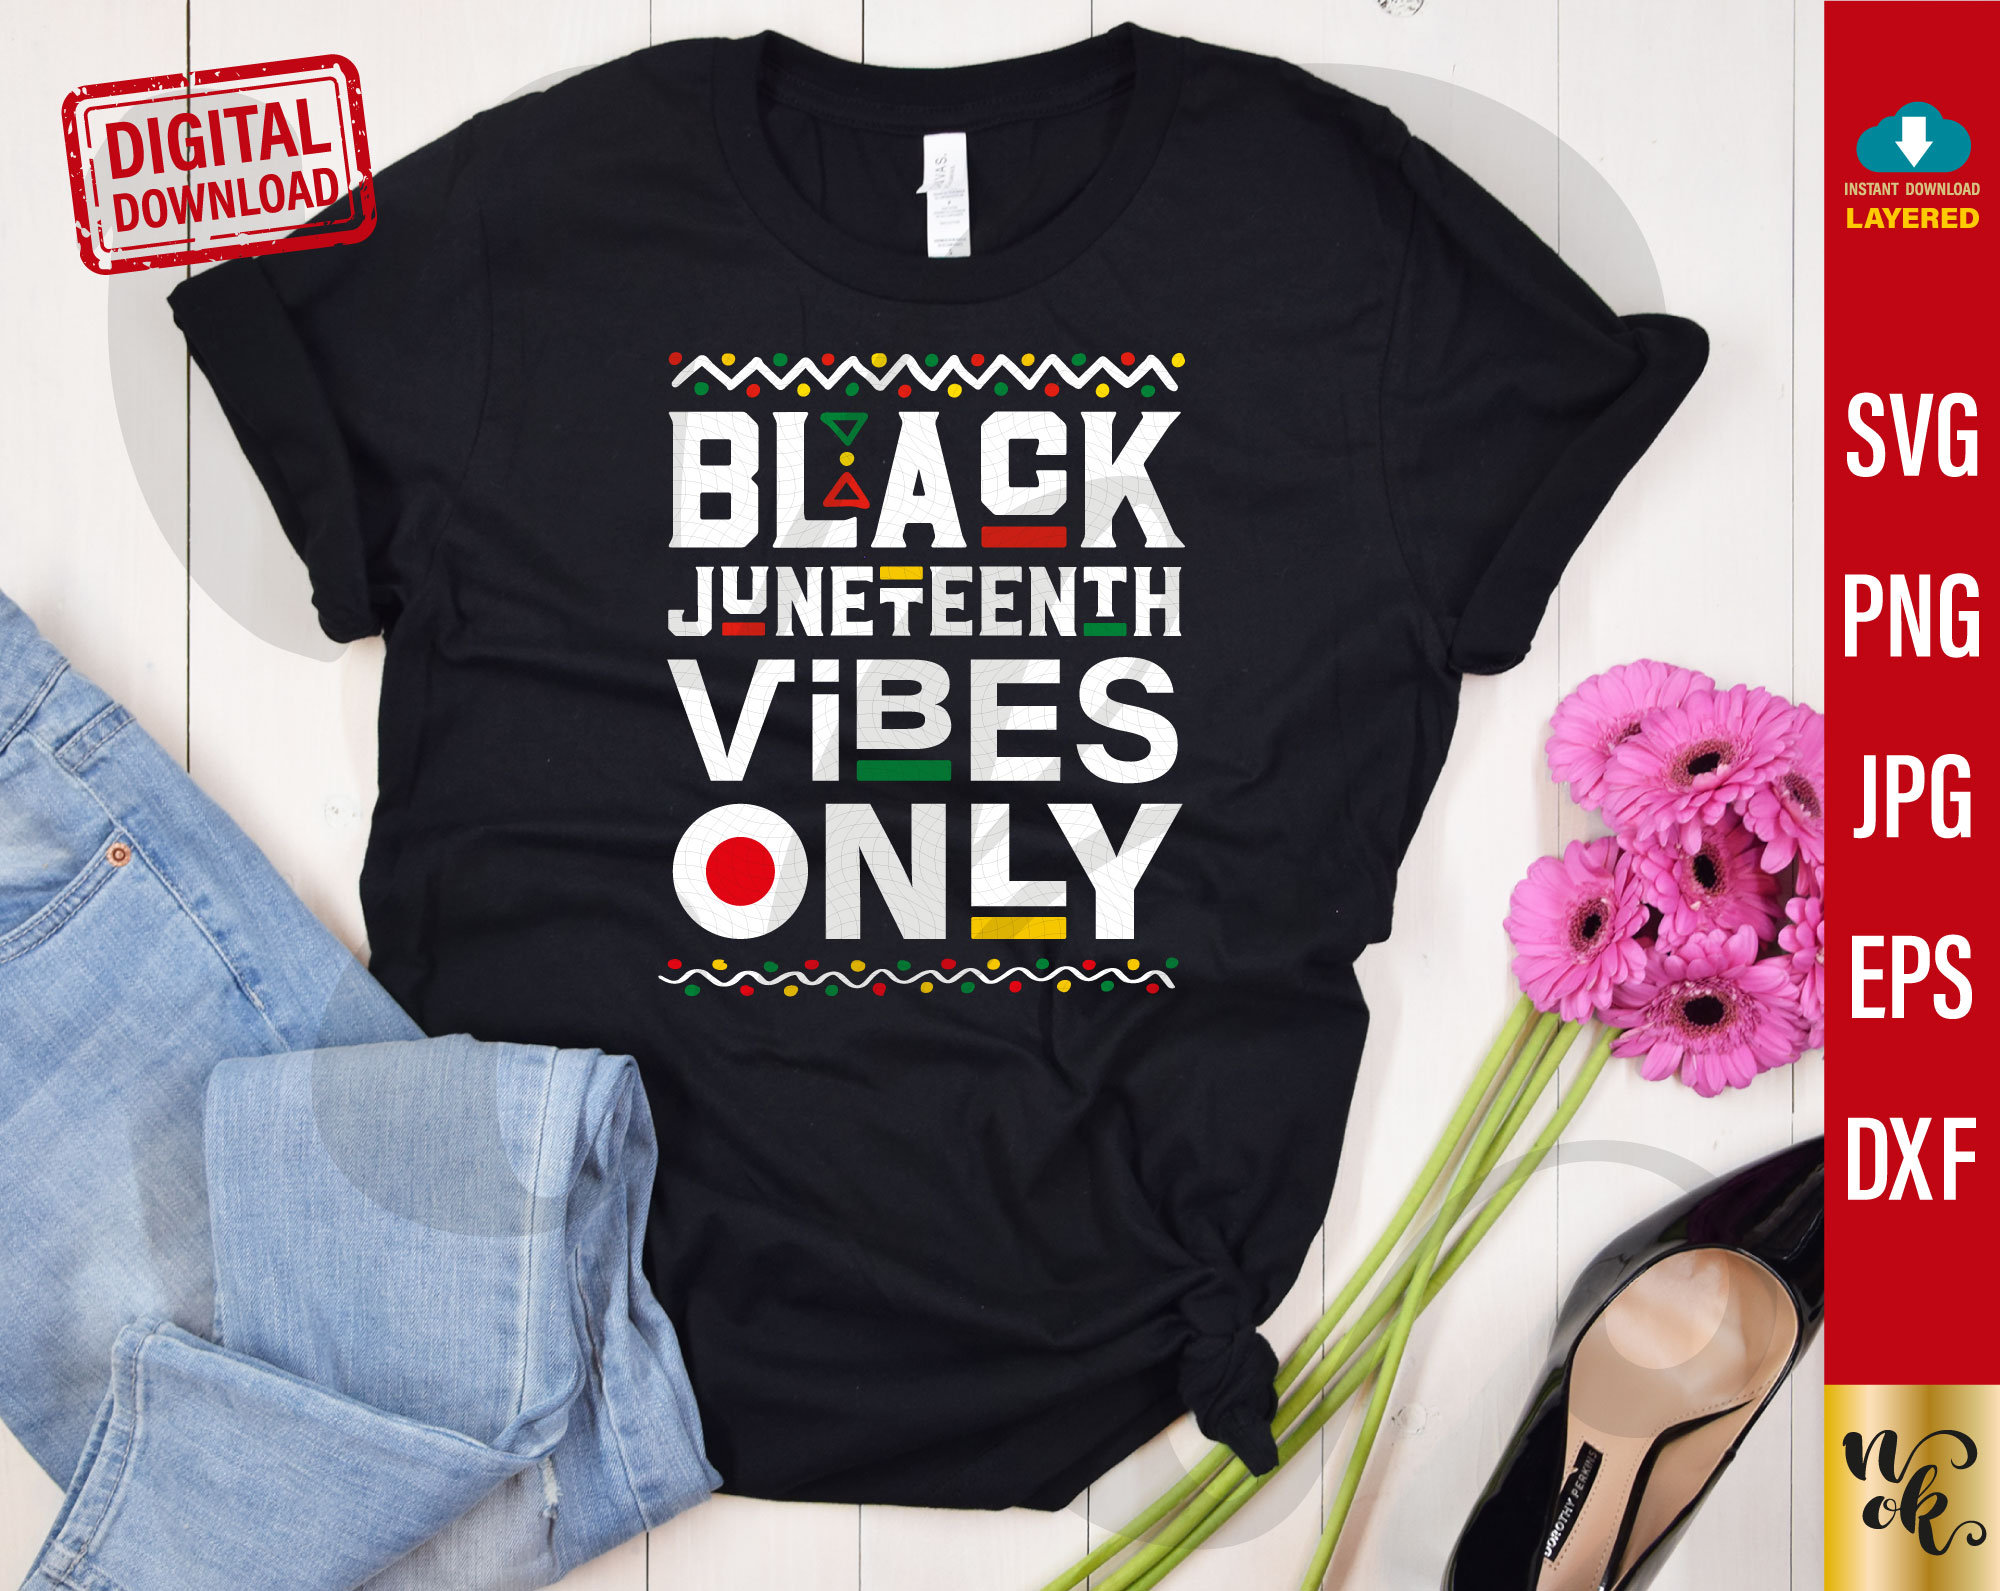 juneteenth vibes only, black history - free svg file for members